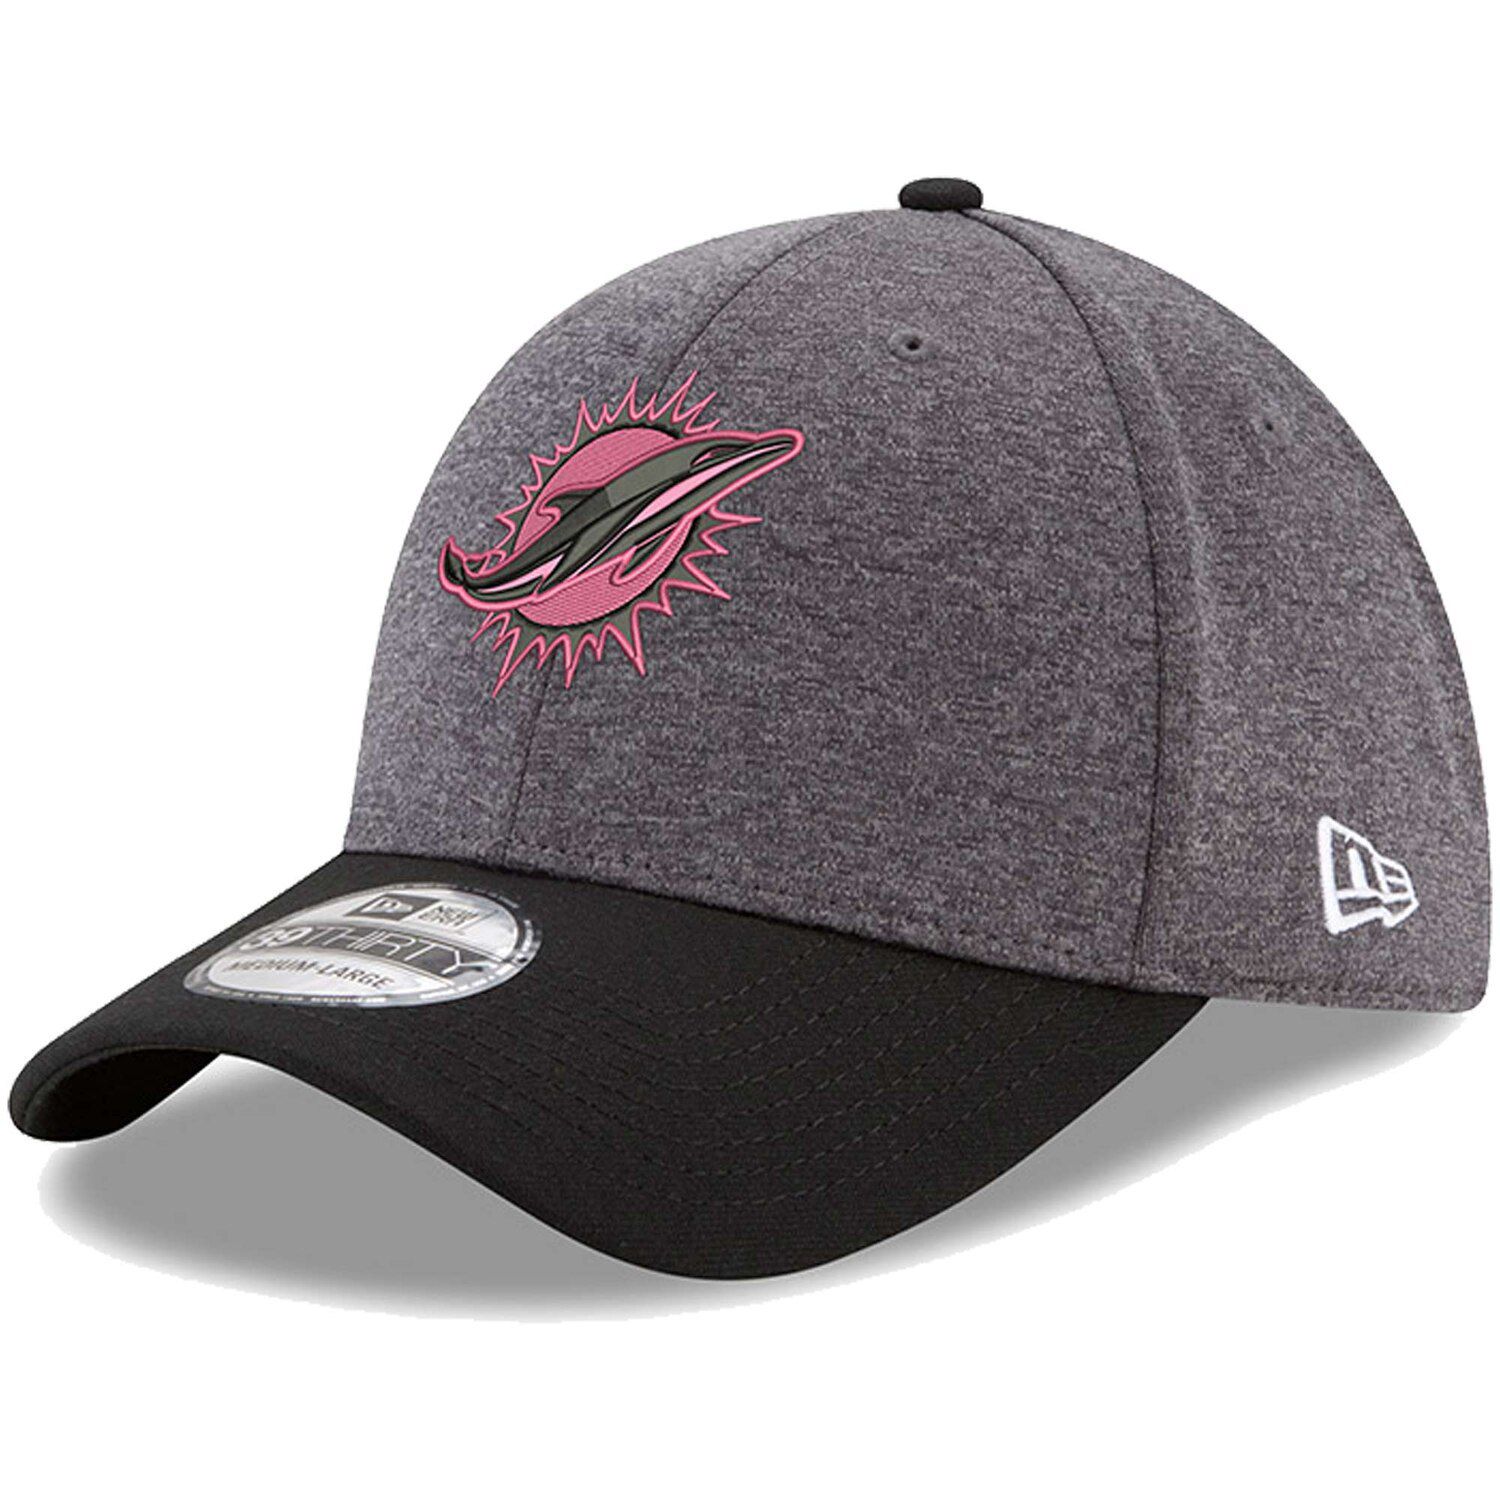 pink miami dolphins hat